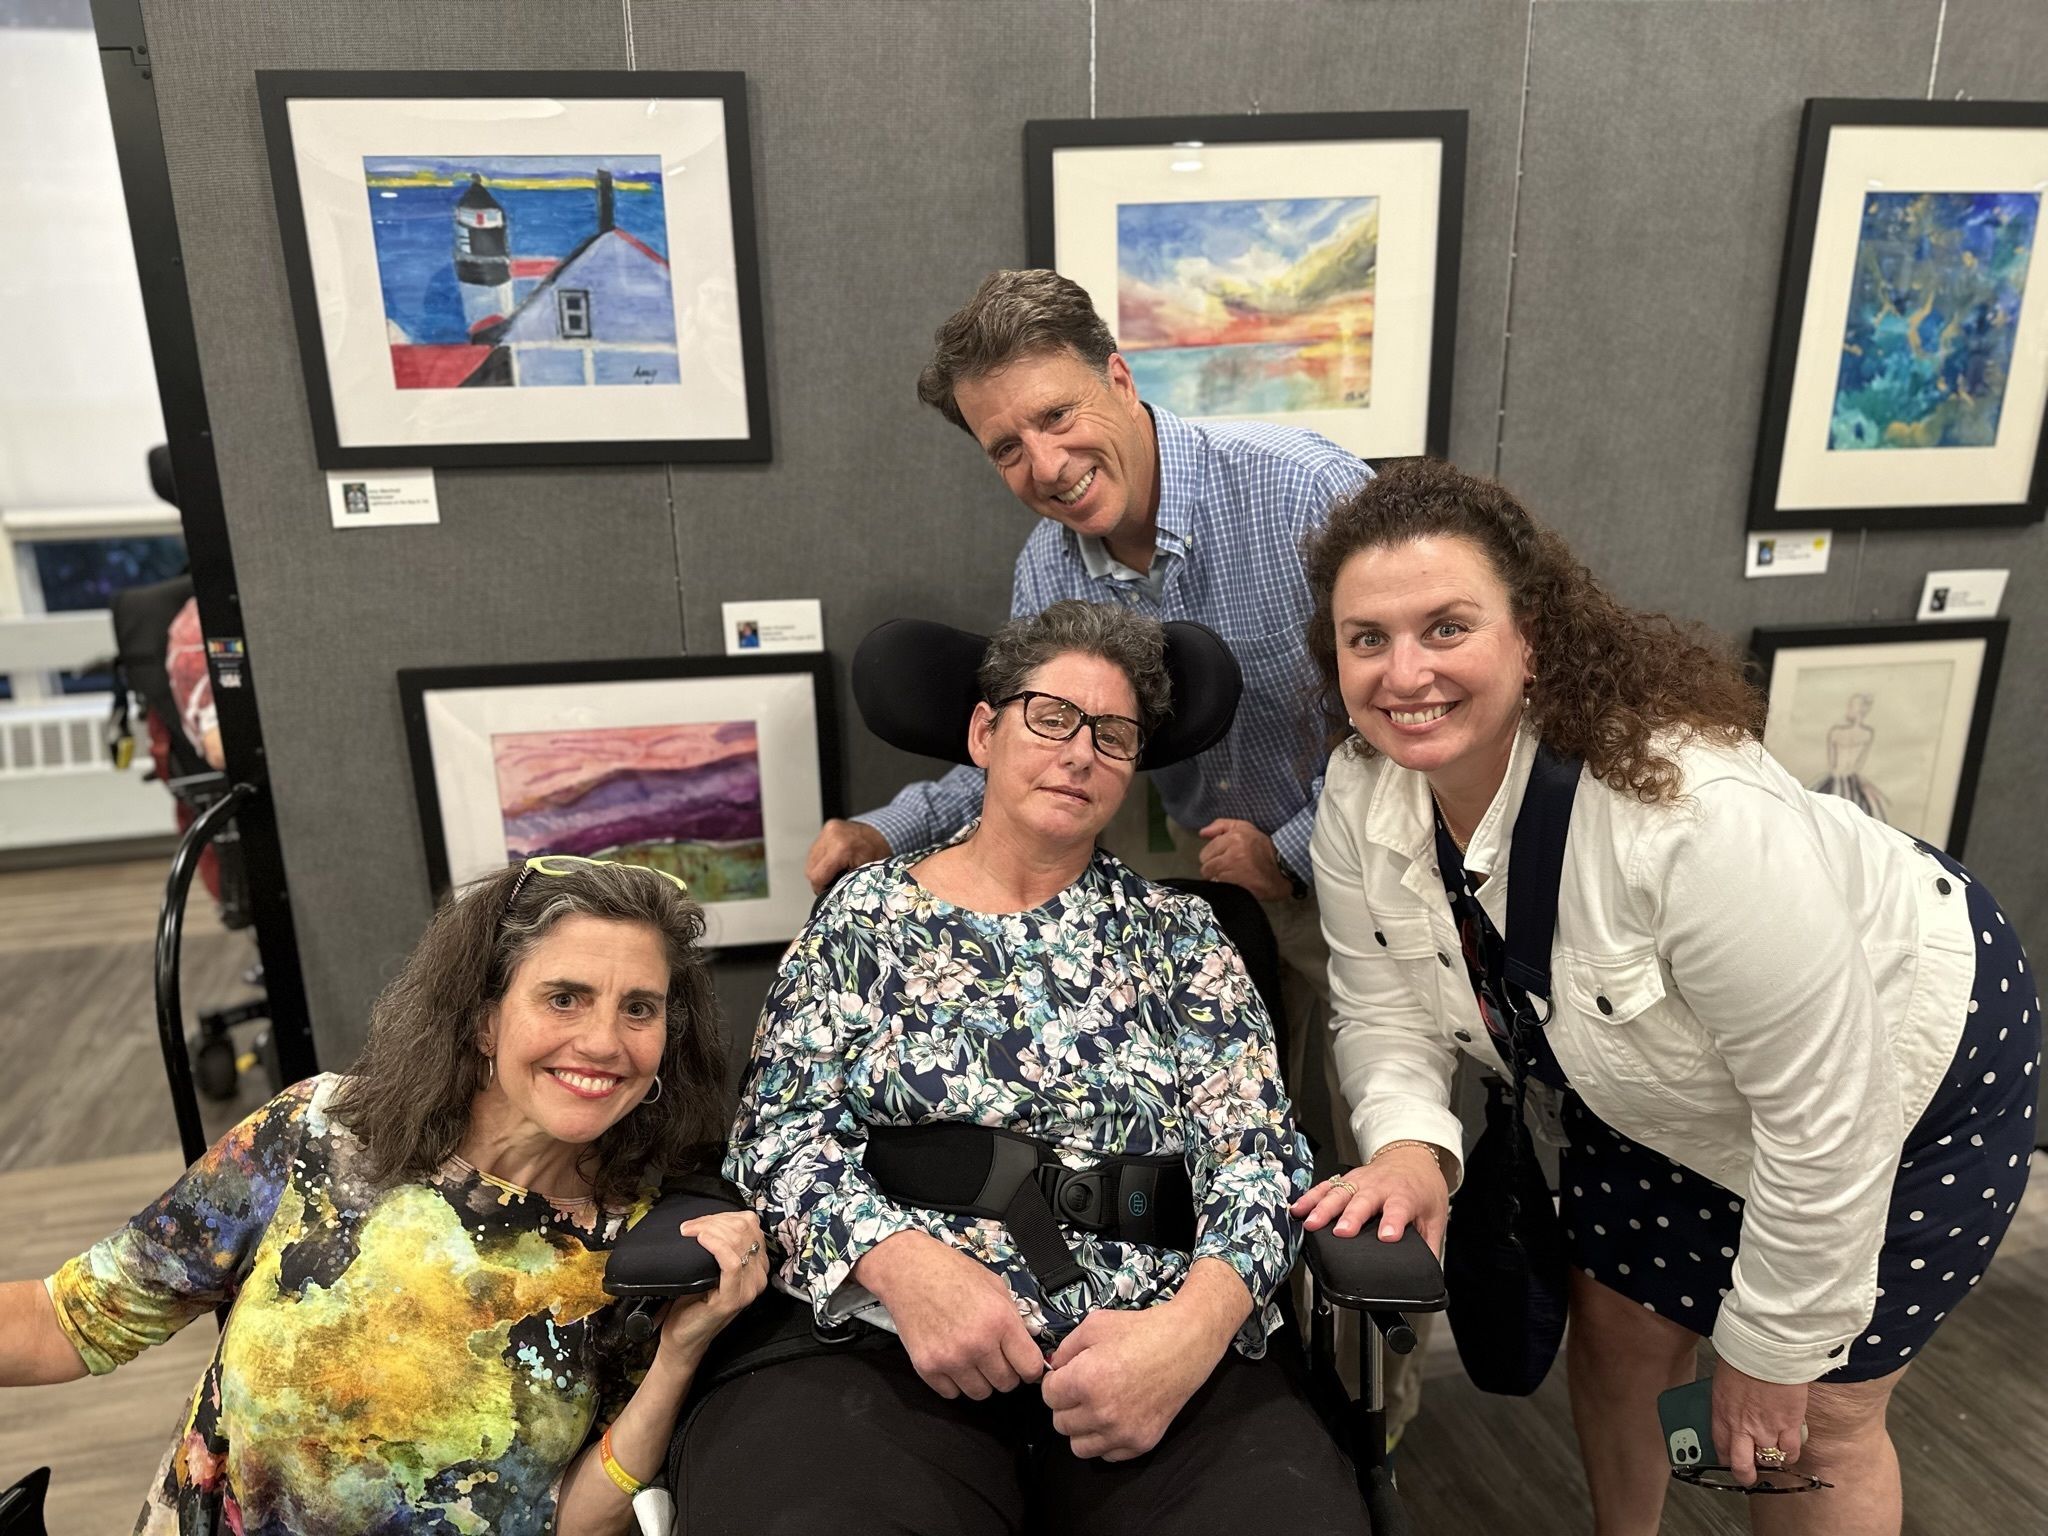 Dorchester Reporter: The Hits Just Keep on Coming at The Boston Home Art Show